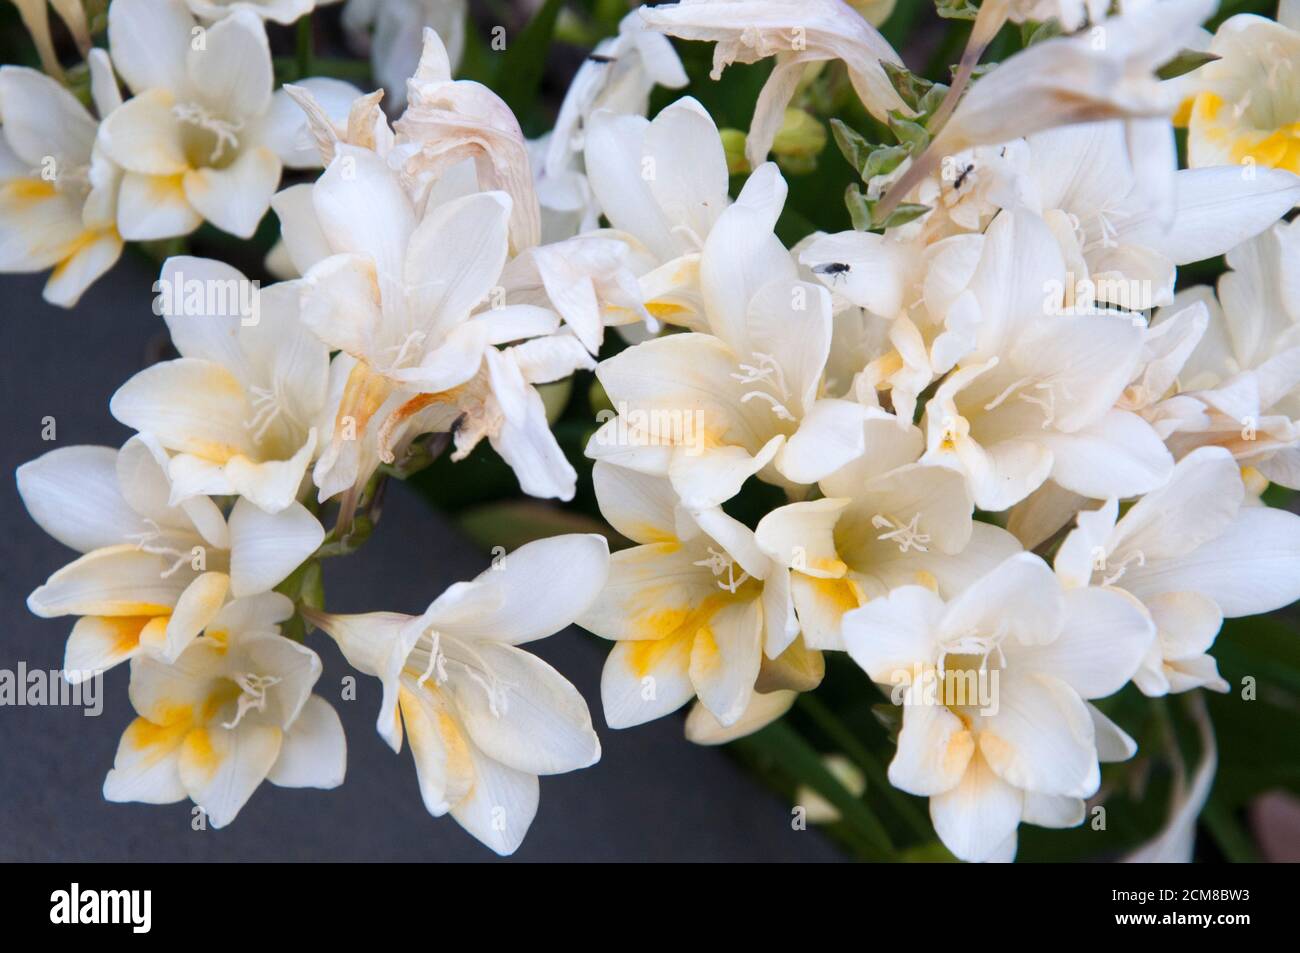 Freesias in flower, Melbourne, August 2020 Stock Photo